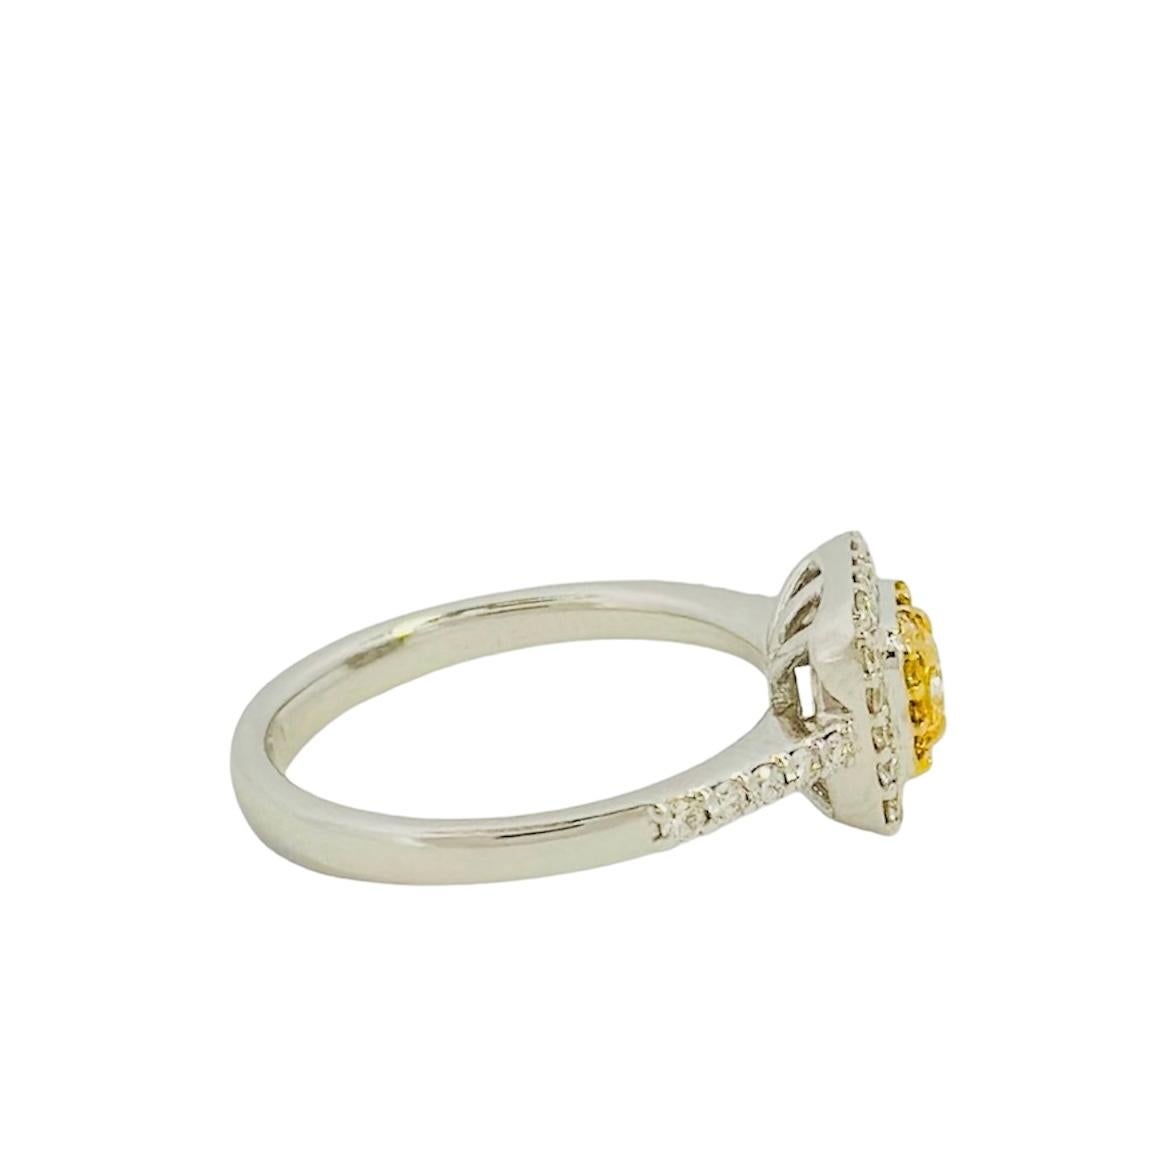 Presenting our Yellow Square-Shaped Cushion Diamond Ring, the epitome of opulence and refinement. This extraordinary piece showcases a stunning 0.26-carat fancy squared-shaped yellow diamond at its center, renowned for its brilliant radiance and